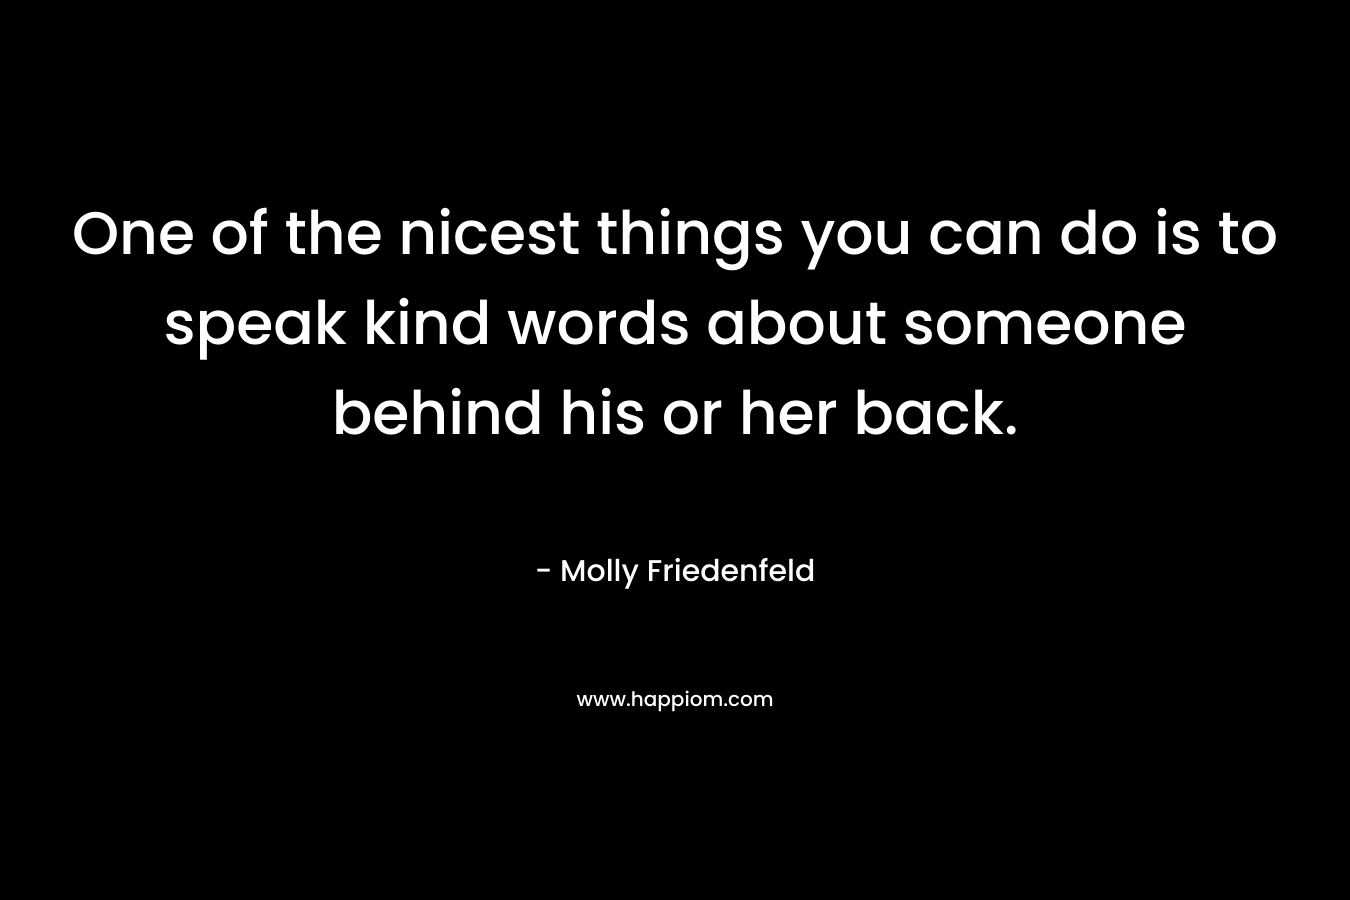 One of the nicest things you can do is to speak kind words about someone behind his or her back. – Molly Friedenfeld